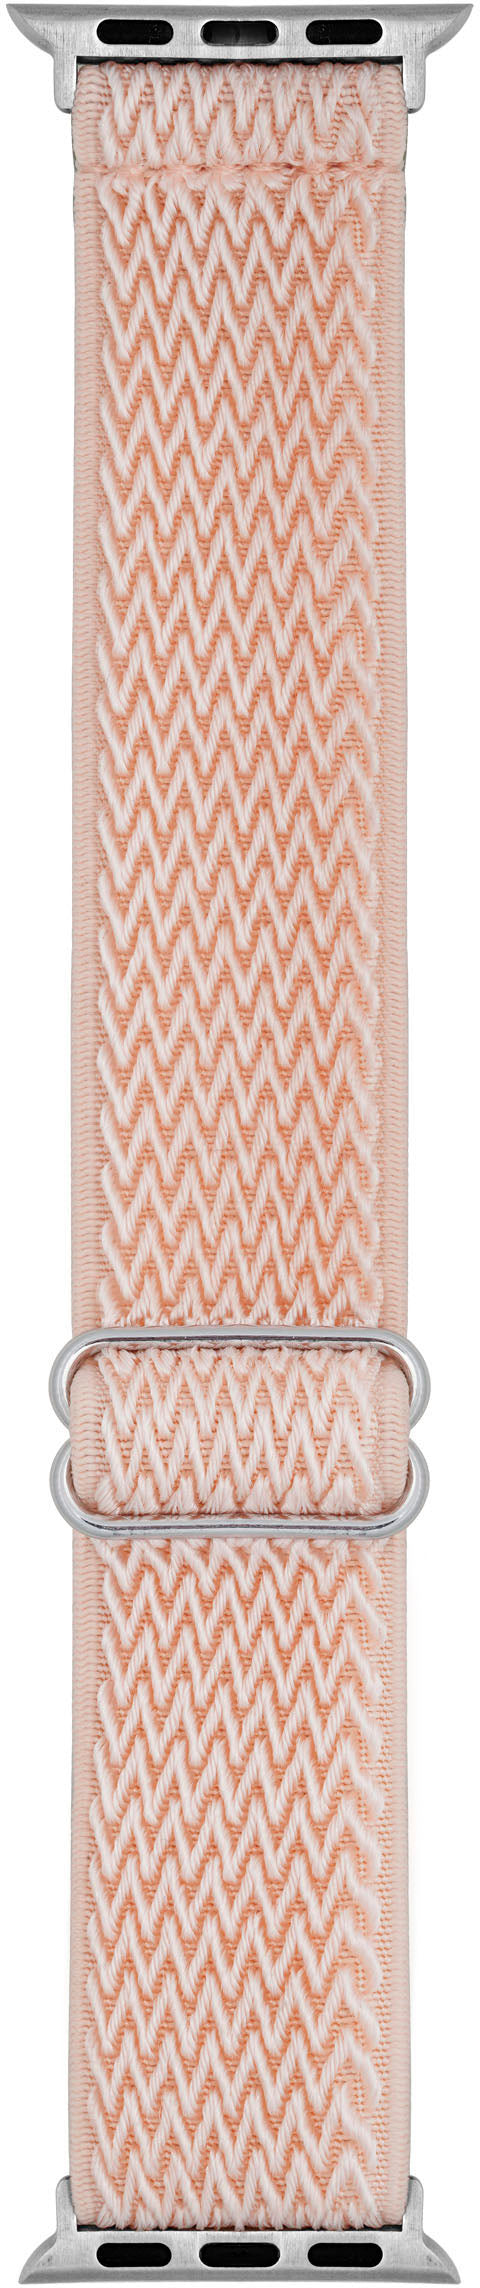 WITHit - Elastic Woven Band for Apple Watch 38/40/41mm - Coral_0